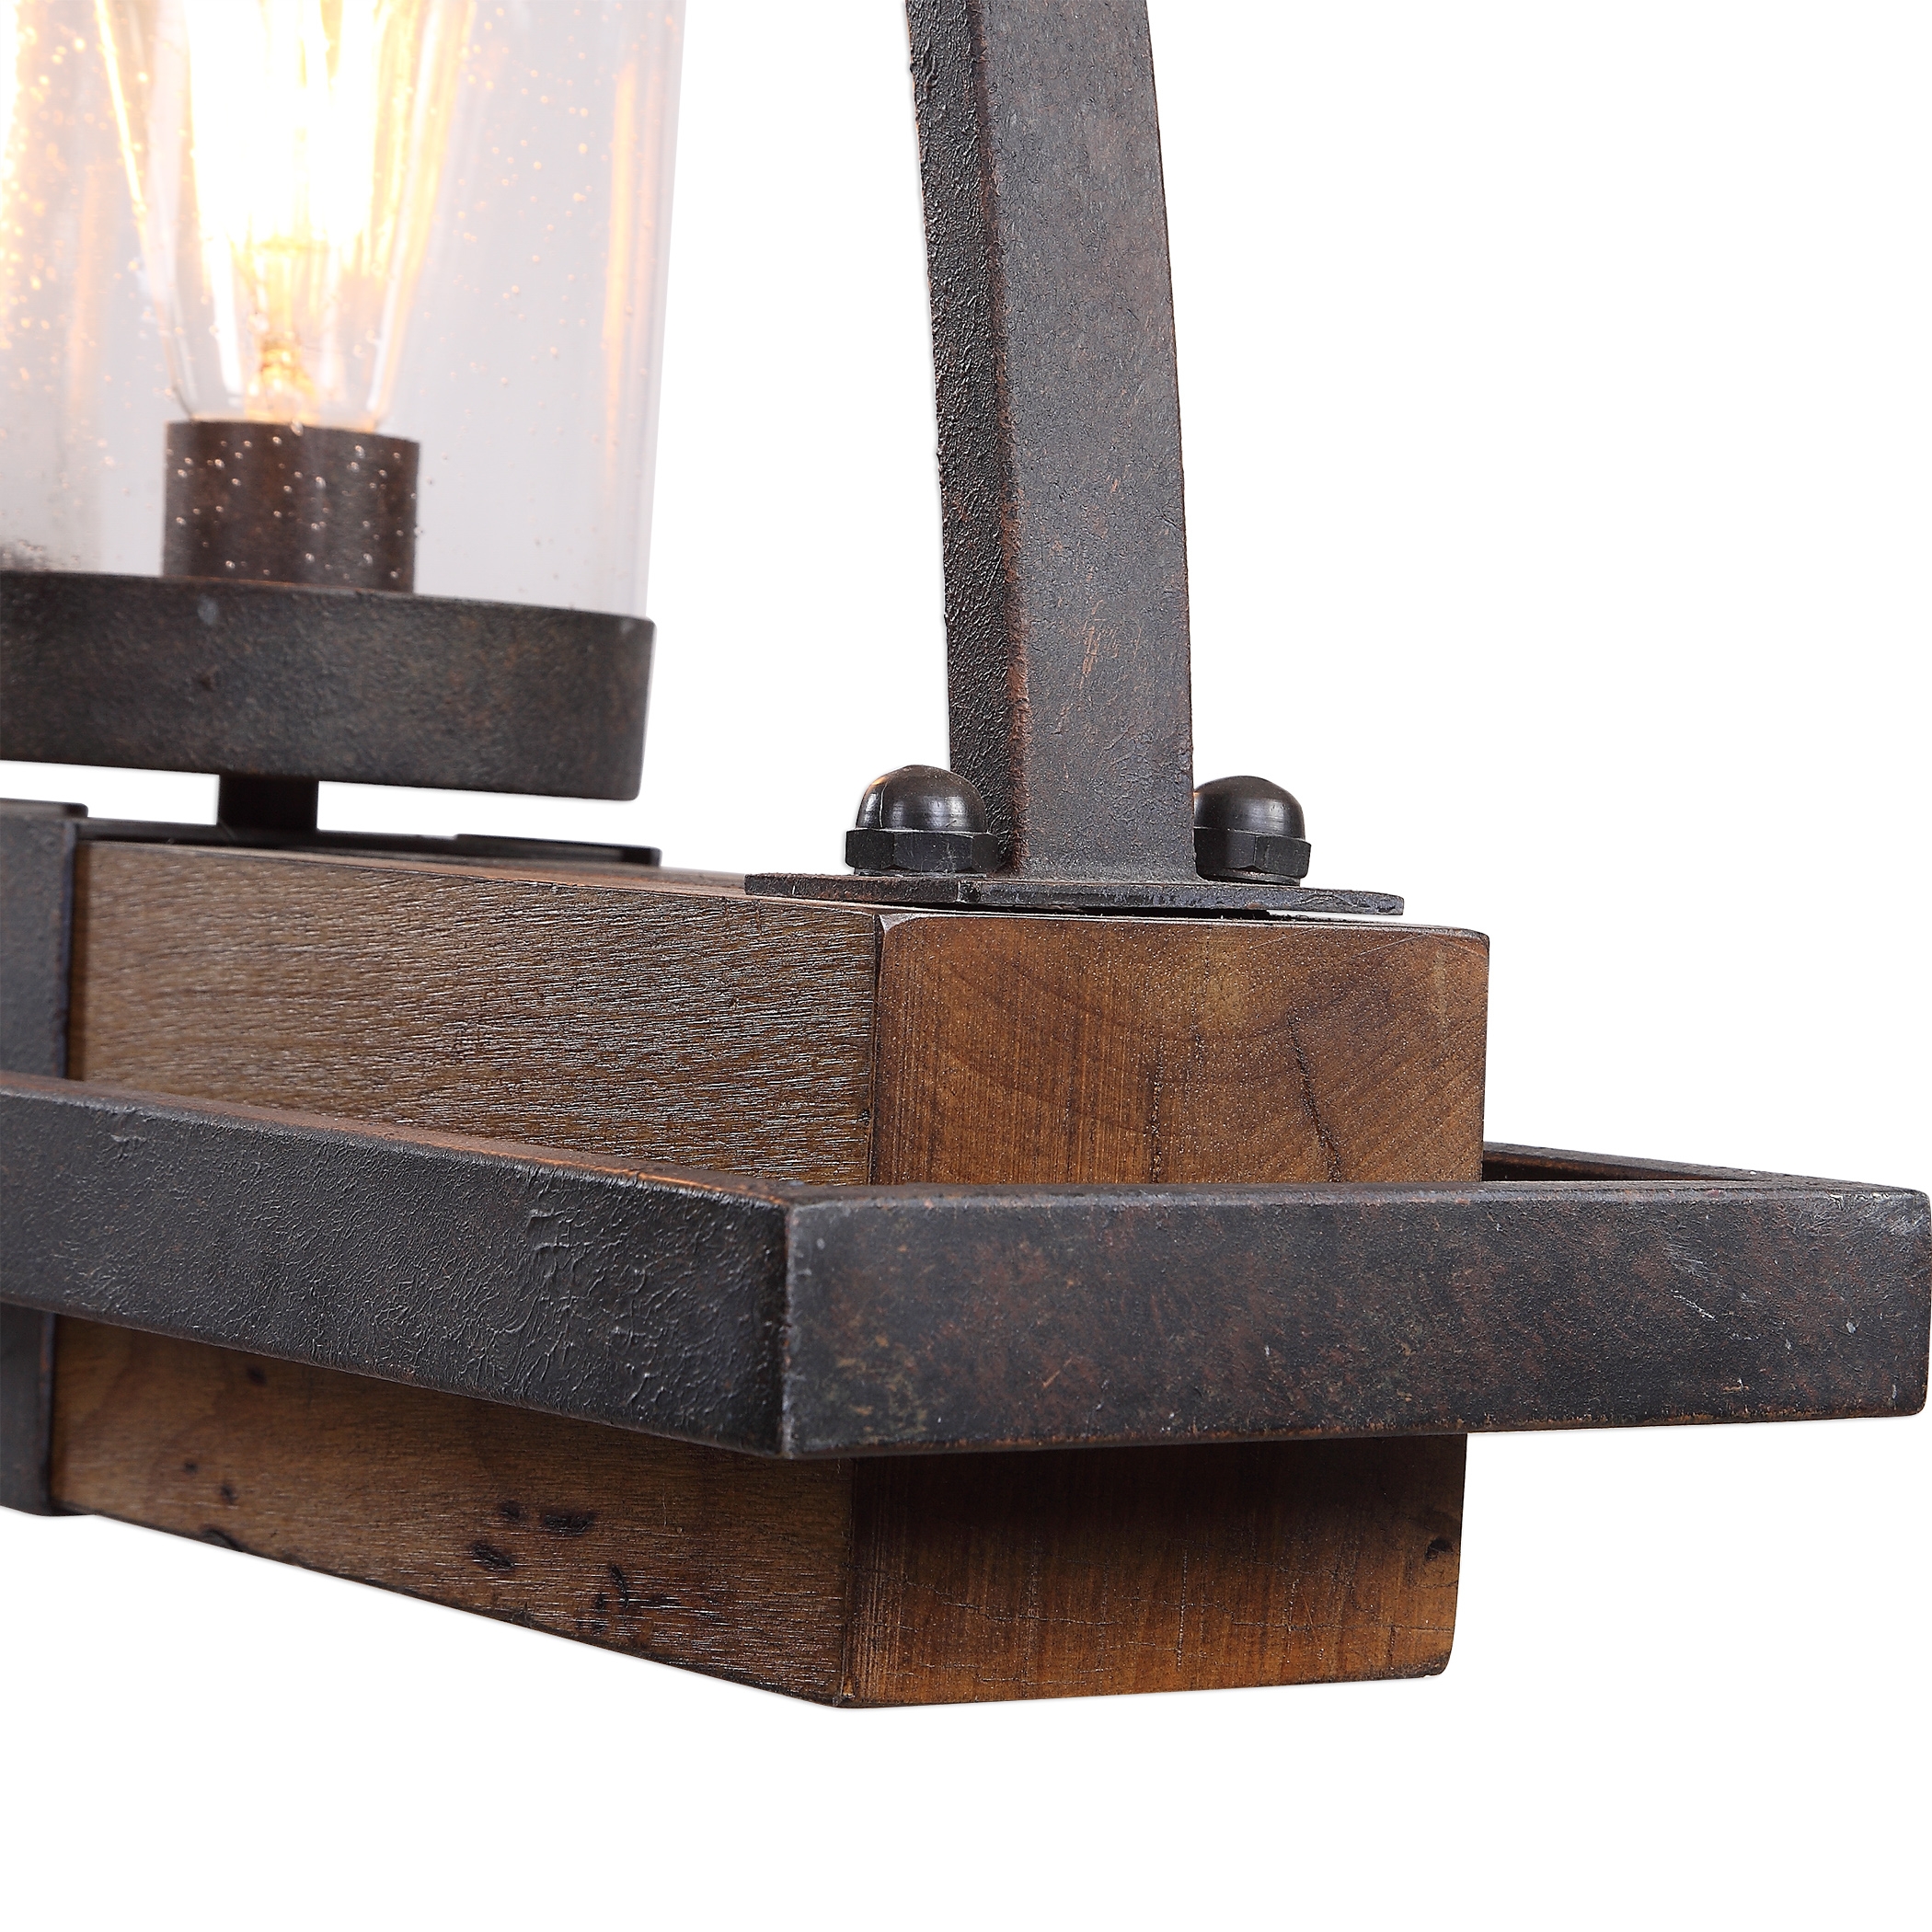 Atwood Rustic Linear Chandelier, 5 Light - Image 2